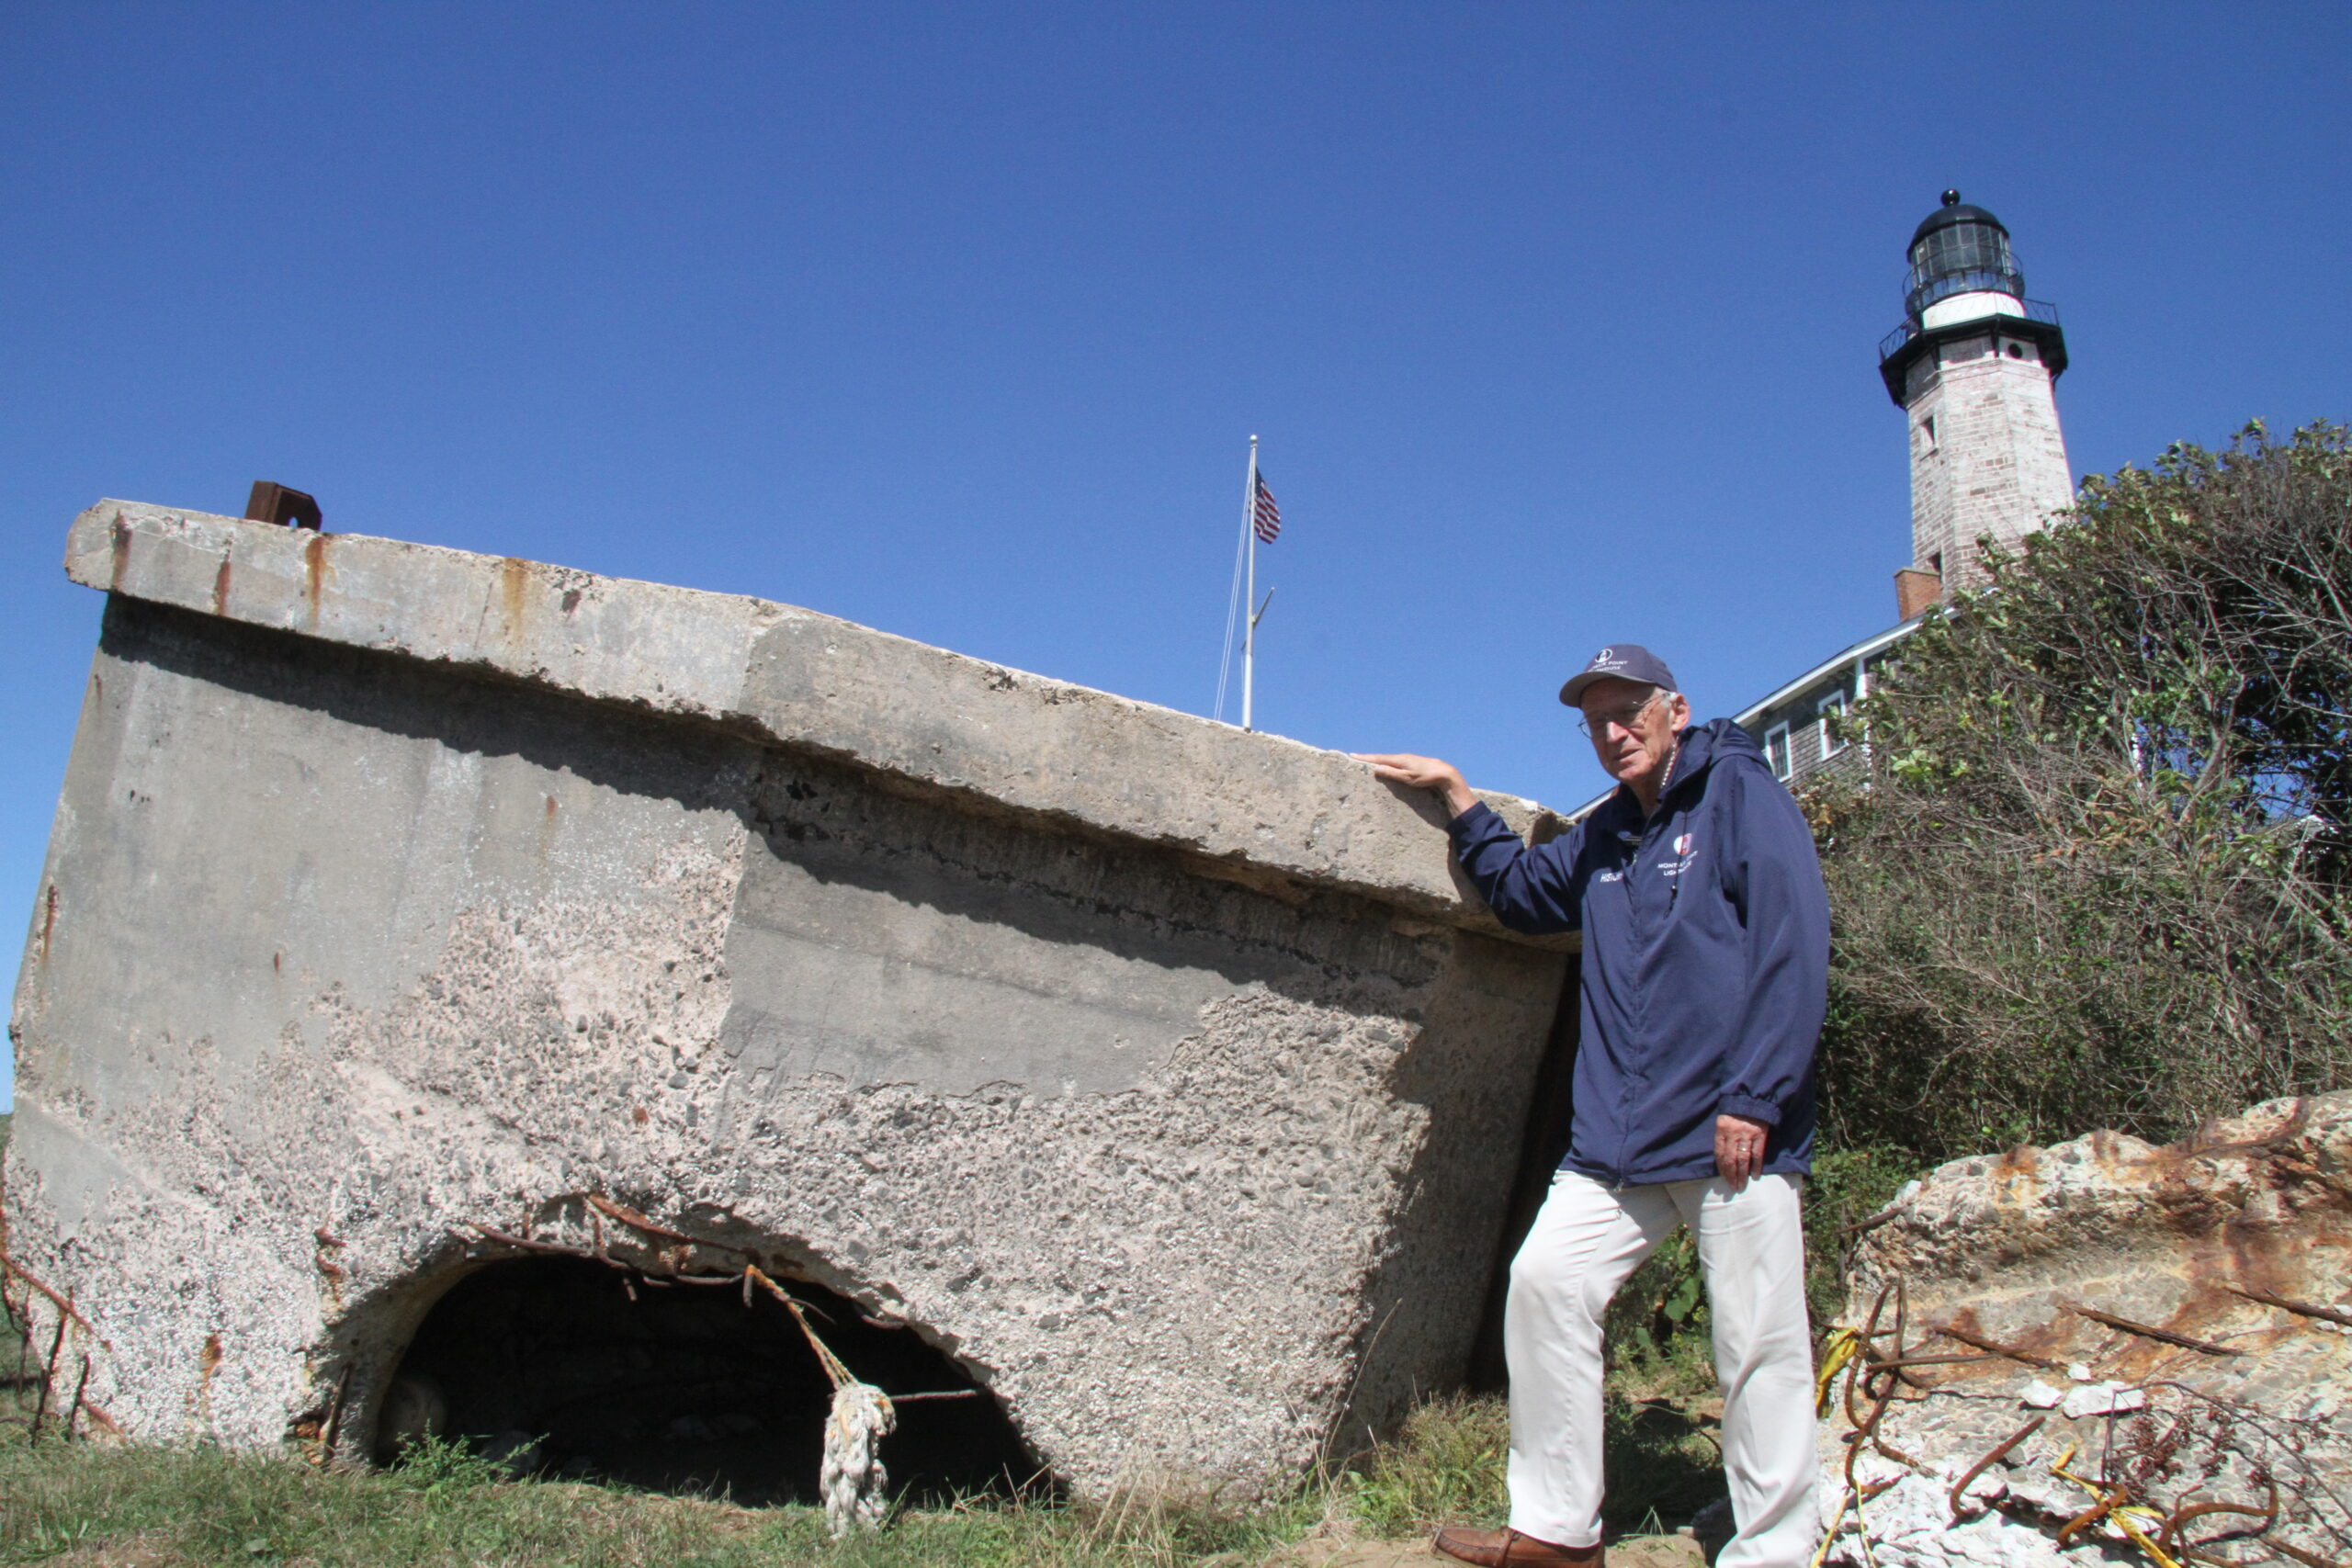 Henry Osmers, the Montauk Lighthouse historian, with the main hunk of the pillbox, which was lifted off the beach at the start of the current revetment extension, and will be reassembled and placed on the lighthouse property, where it had originally served as a WWII-era watch station.